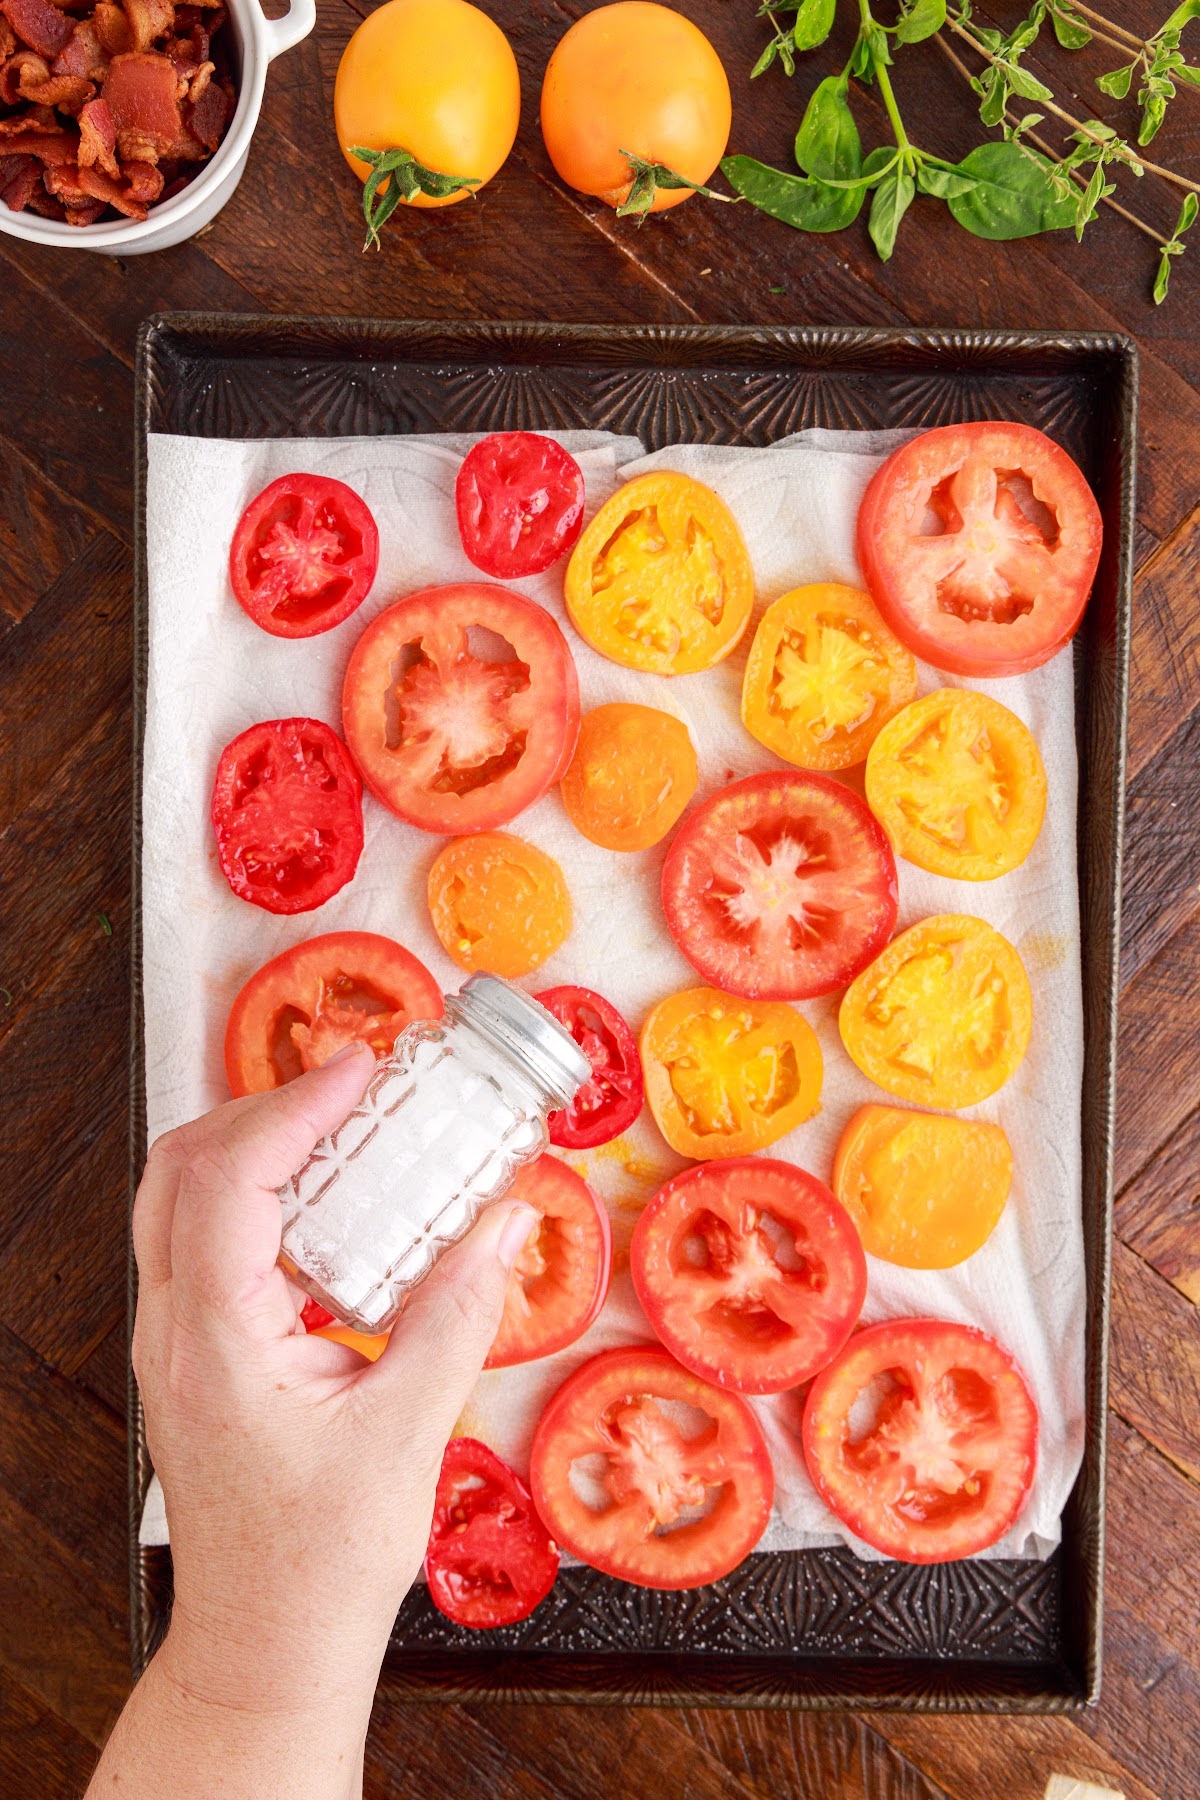 Shaking salt shaker over the tomato slices spread out over paper towels in sheet pan.